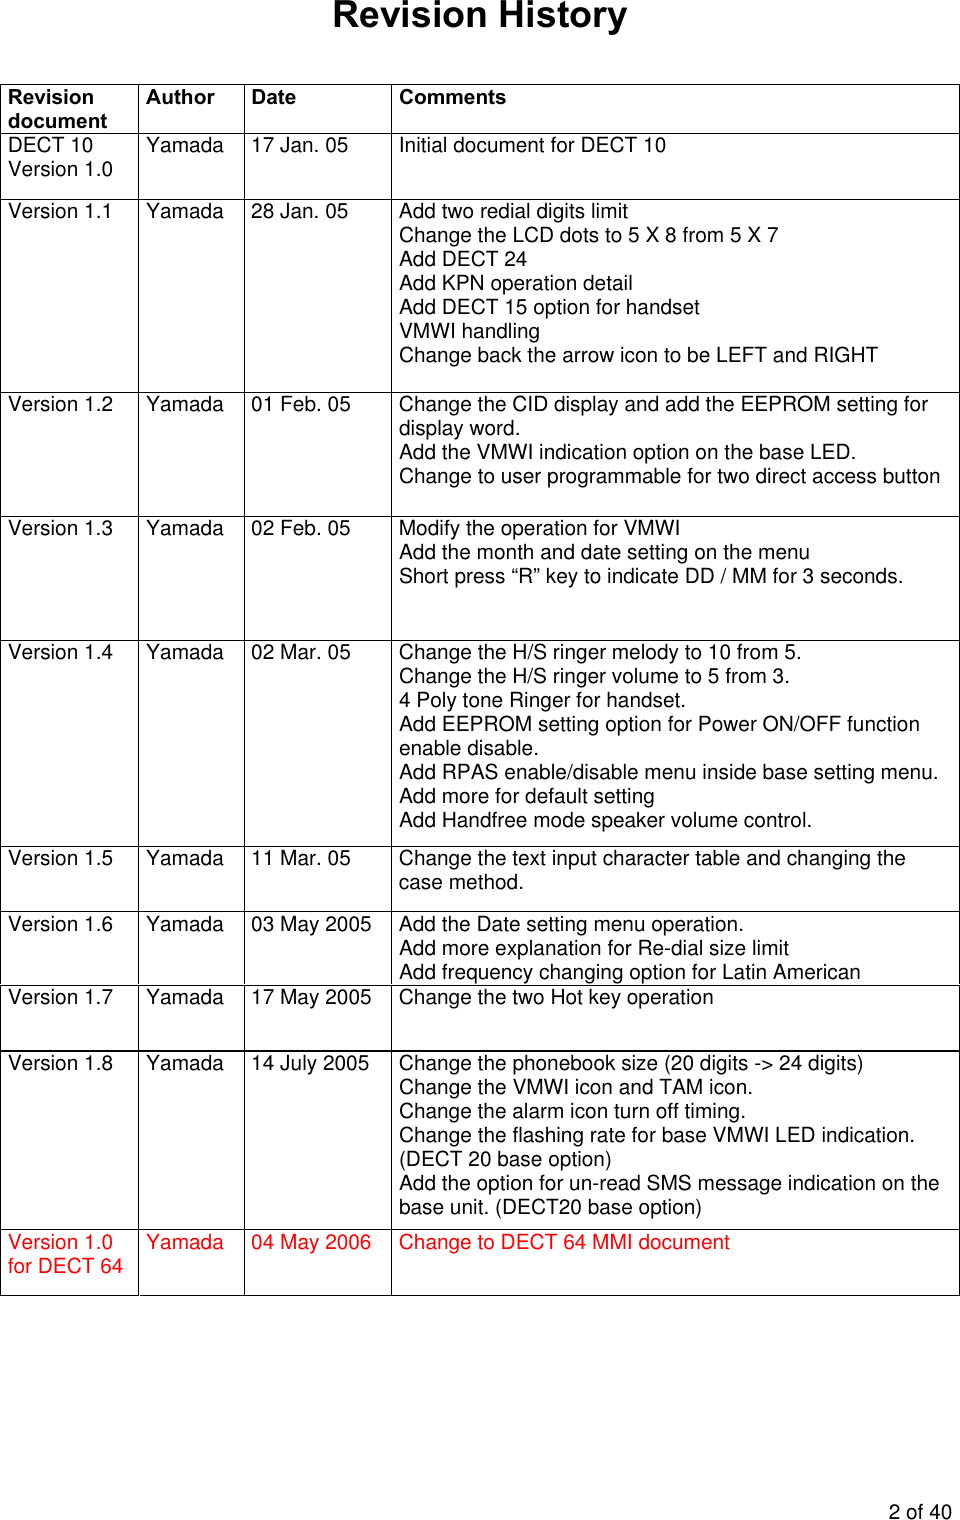 Revision History   Revision document Author Date  Comments DECT 10 Version 1.0  Yamada  17 Jan. 05  Initial document for DECT 10 Version 1.1  Yamada  28 Jan. 05  Add two redial digits limit Change the LCD dots to 5 X 8 from 5 X 7 Add DECT 24 Add KPN operation detail Add DECT 15 option for handset VMWI handling Change back the arrow icon to be LEFT and RIGHT  Version 1.2  Yamada  01 Feb. 05  Change the CID display and add the EEPROM setting for display word. Add the VMWI indication option on the base LED. Change to user programmable for two direct access buttonVersion 1.3  Yamada  02 Feb. 05  Modify the operation for VMWI Add the month and date setting on the menu Short press “R” key to indicate DD / MM for 3 seconds. Version 1.4  Yamada  02 Mar. 05  Change the H/S ringer melody to 10 from 5. Change the H/S ringer volume to 5 from 3. 4 Poly tone Ringer for handset. Add EEPROM setting option for Power ON/OFF function enable disable. Add RPAS enable/disable menu inside base setting menu. Add more for default setting Add Handfree mode speaker volume control. Version 1.5  Yamada  11 Mar. 05  Change the text input character table and changing the case method. Version 1.6  Yamada  03 May 2005  Add the Date setting menu operation. Add more explanation for Re-dial size limit Add frequency changing option for Latin American Version 1.7  Yamada  17 May 2005  Change the two Hot key operation Version 1.8  Yamada  14 July 2005  Change the phonebook size (20 digits -&gt; 24 digits) Change the VMWI icon and TAM icon. Change the alarm icon turn off timing.  Change the flashing rate for base VMWI LED indication. (DECT 20 base option) Add the option for un-read SMS message indication on the base unit. (DECT20 base option) Version 1.0 for DECT 64  Yamada  04 May 2006  Change to DECT 64 MMI document   2 of 40 